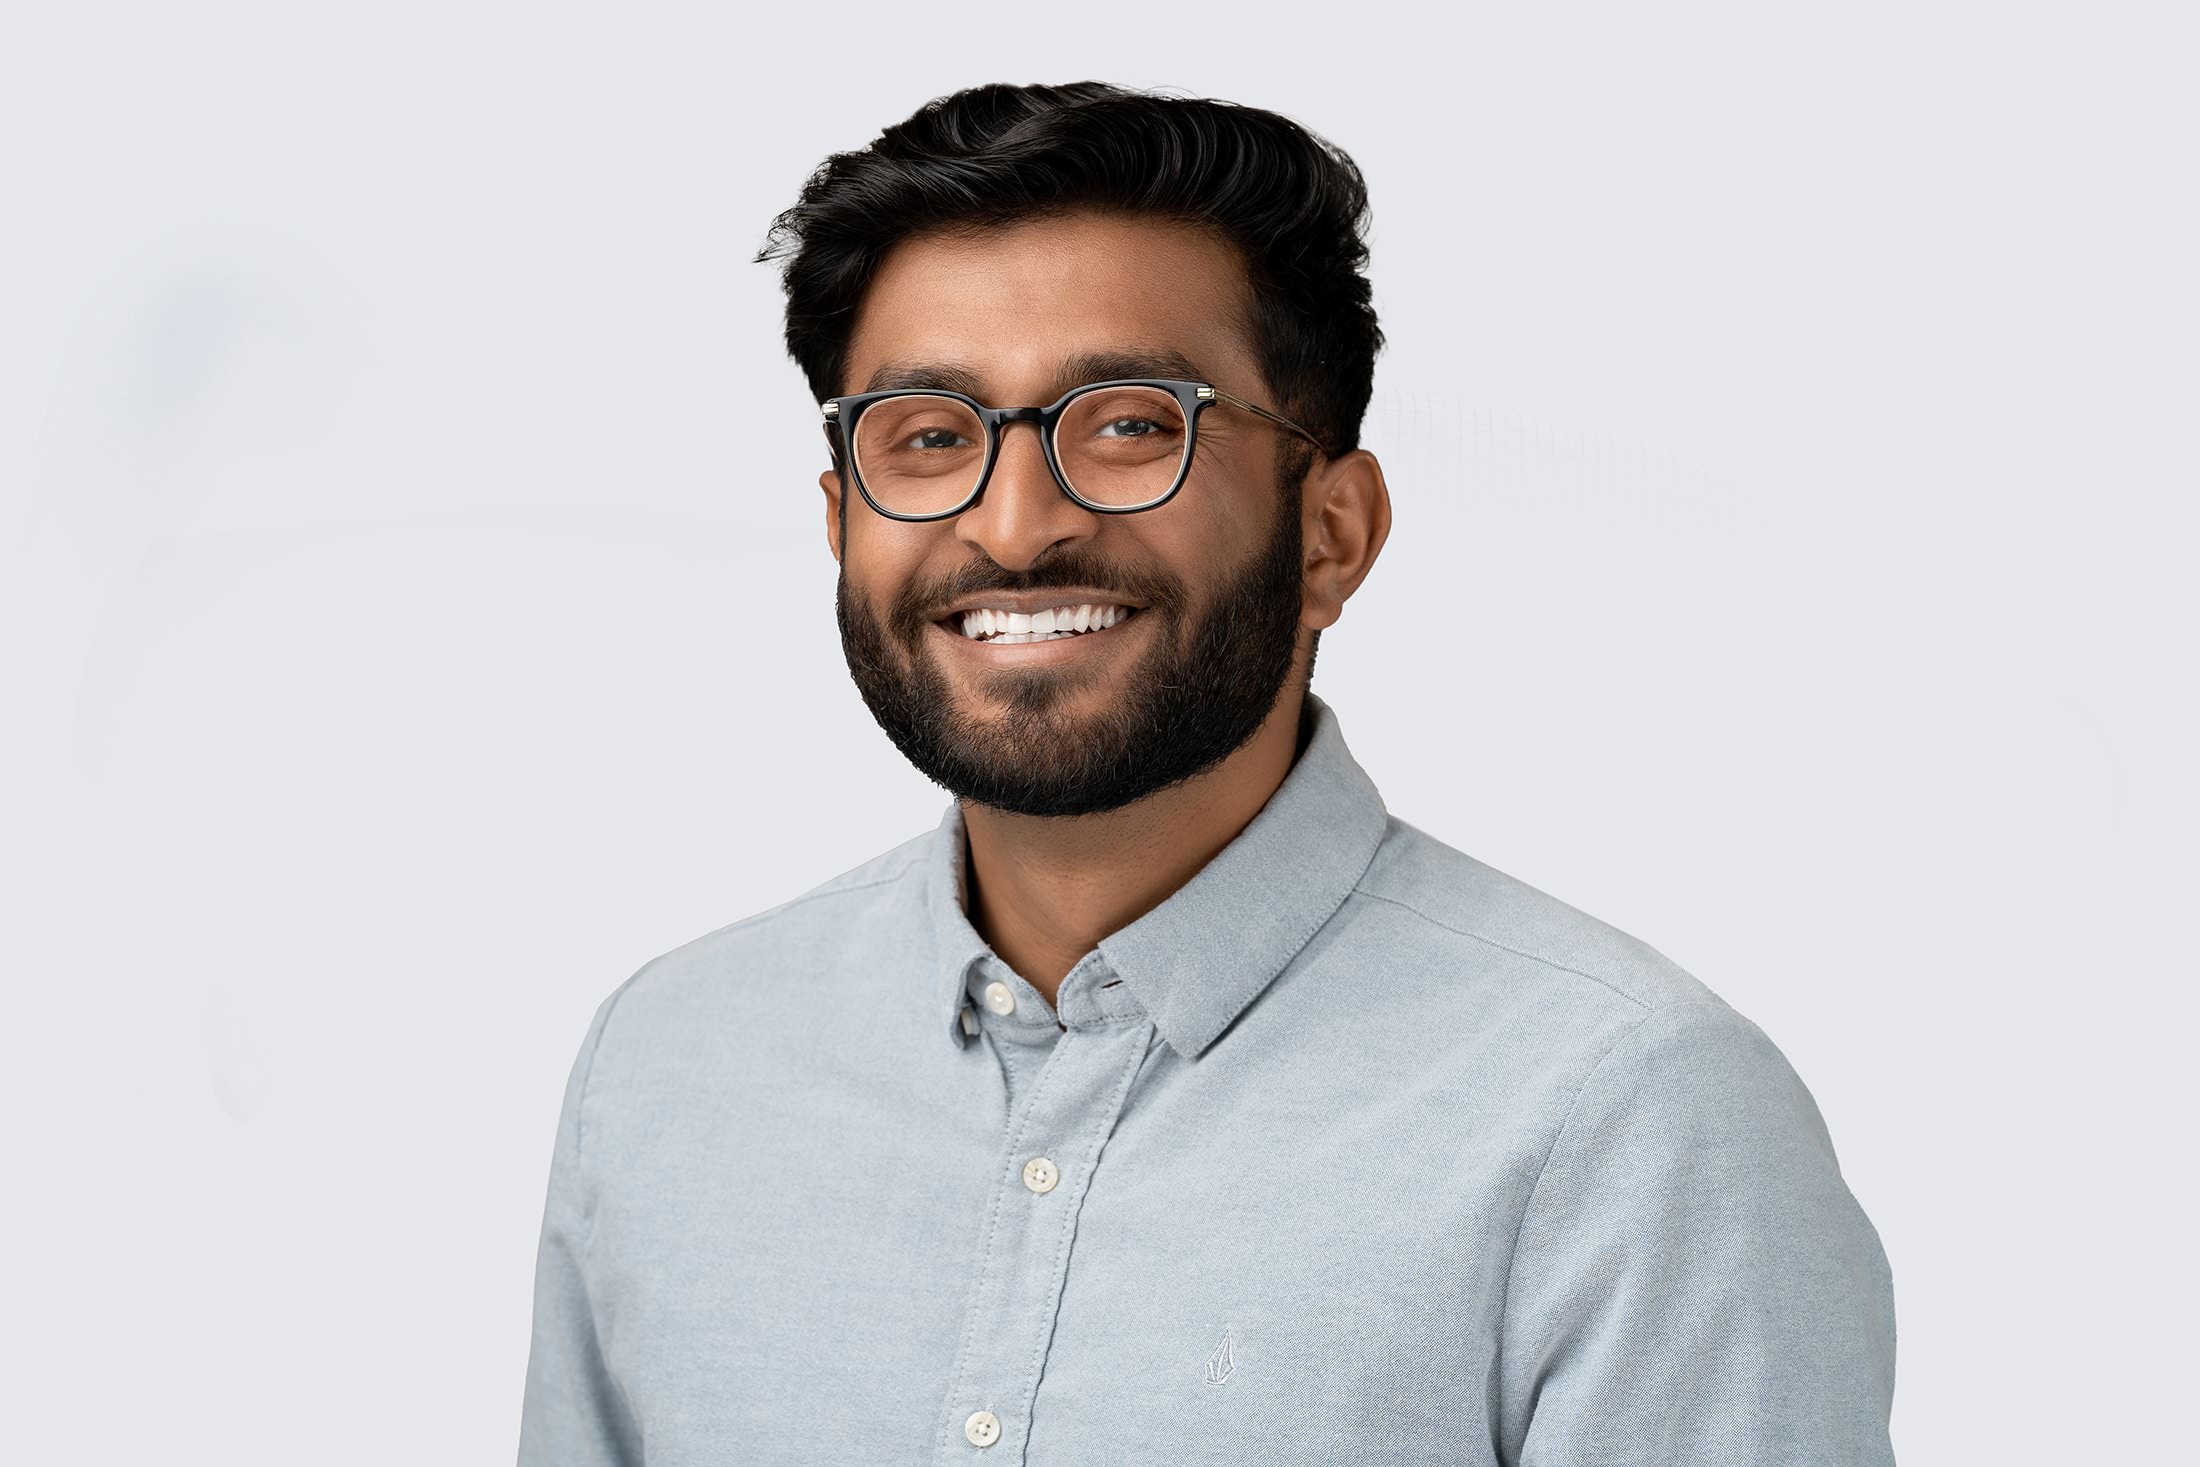 a man with glasses and a beard smiling.